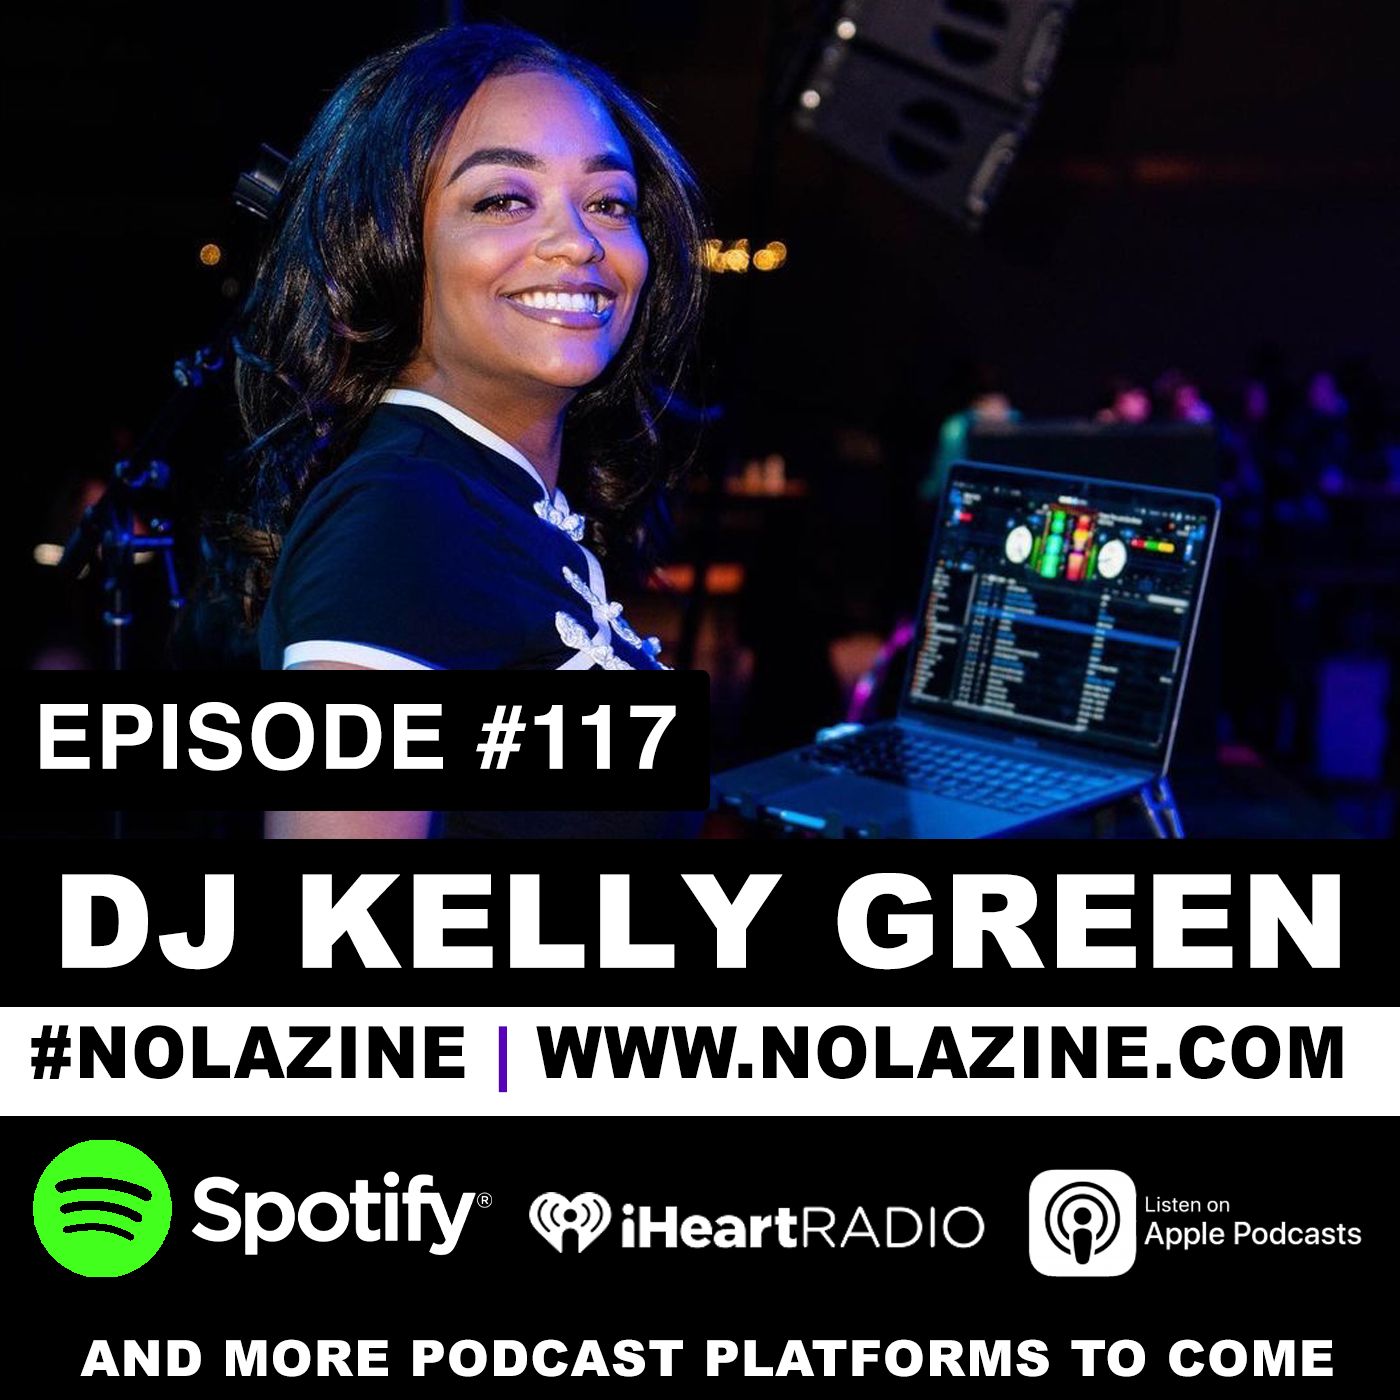 EP: 117 Featuring DJ Kelly Green